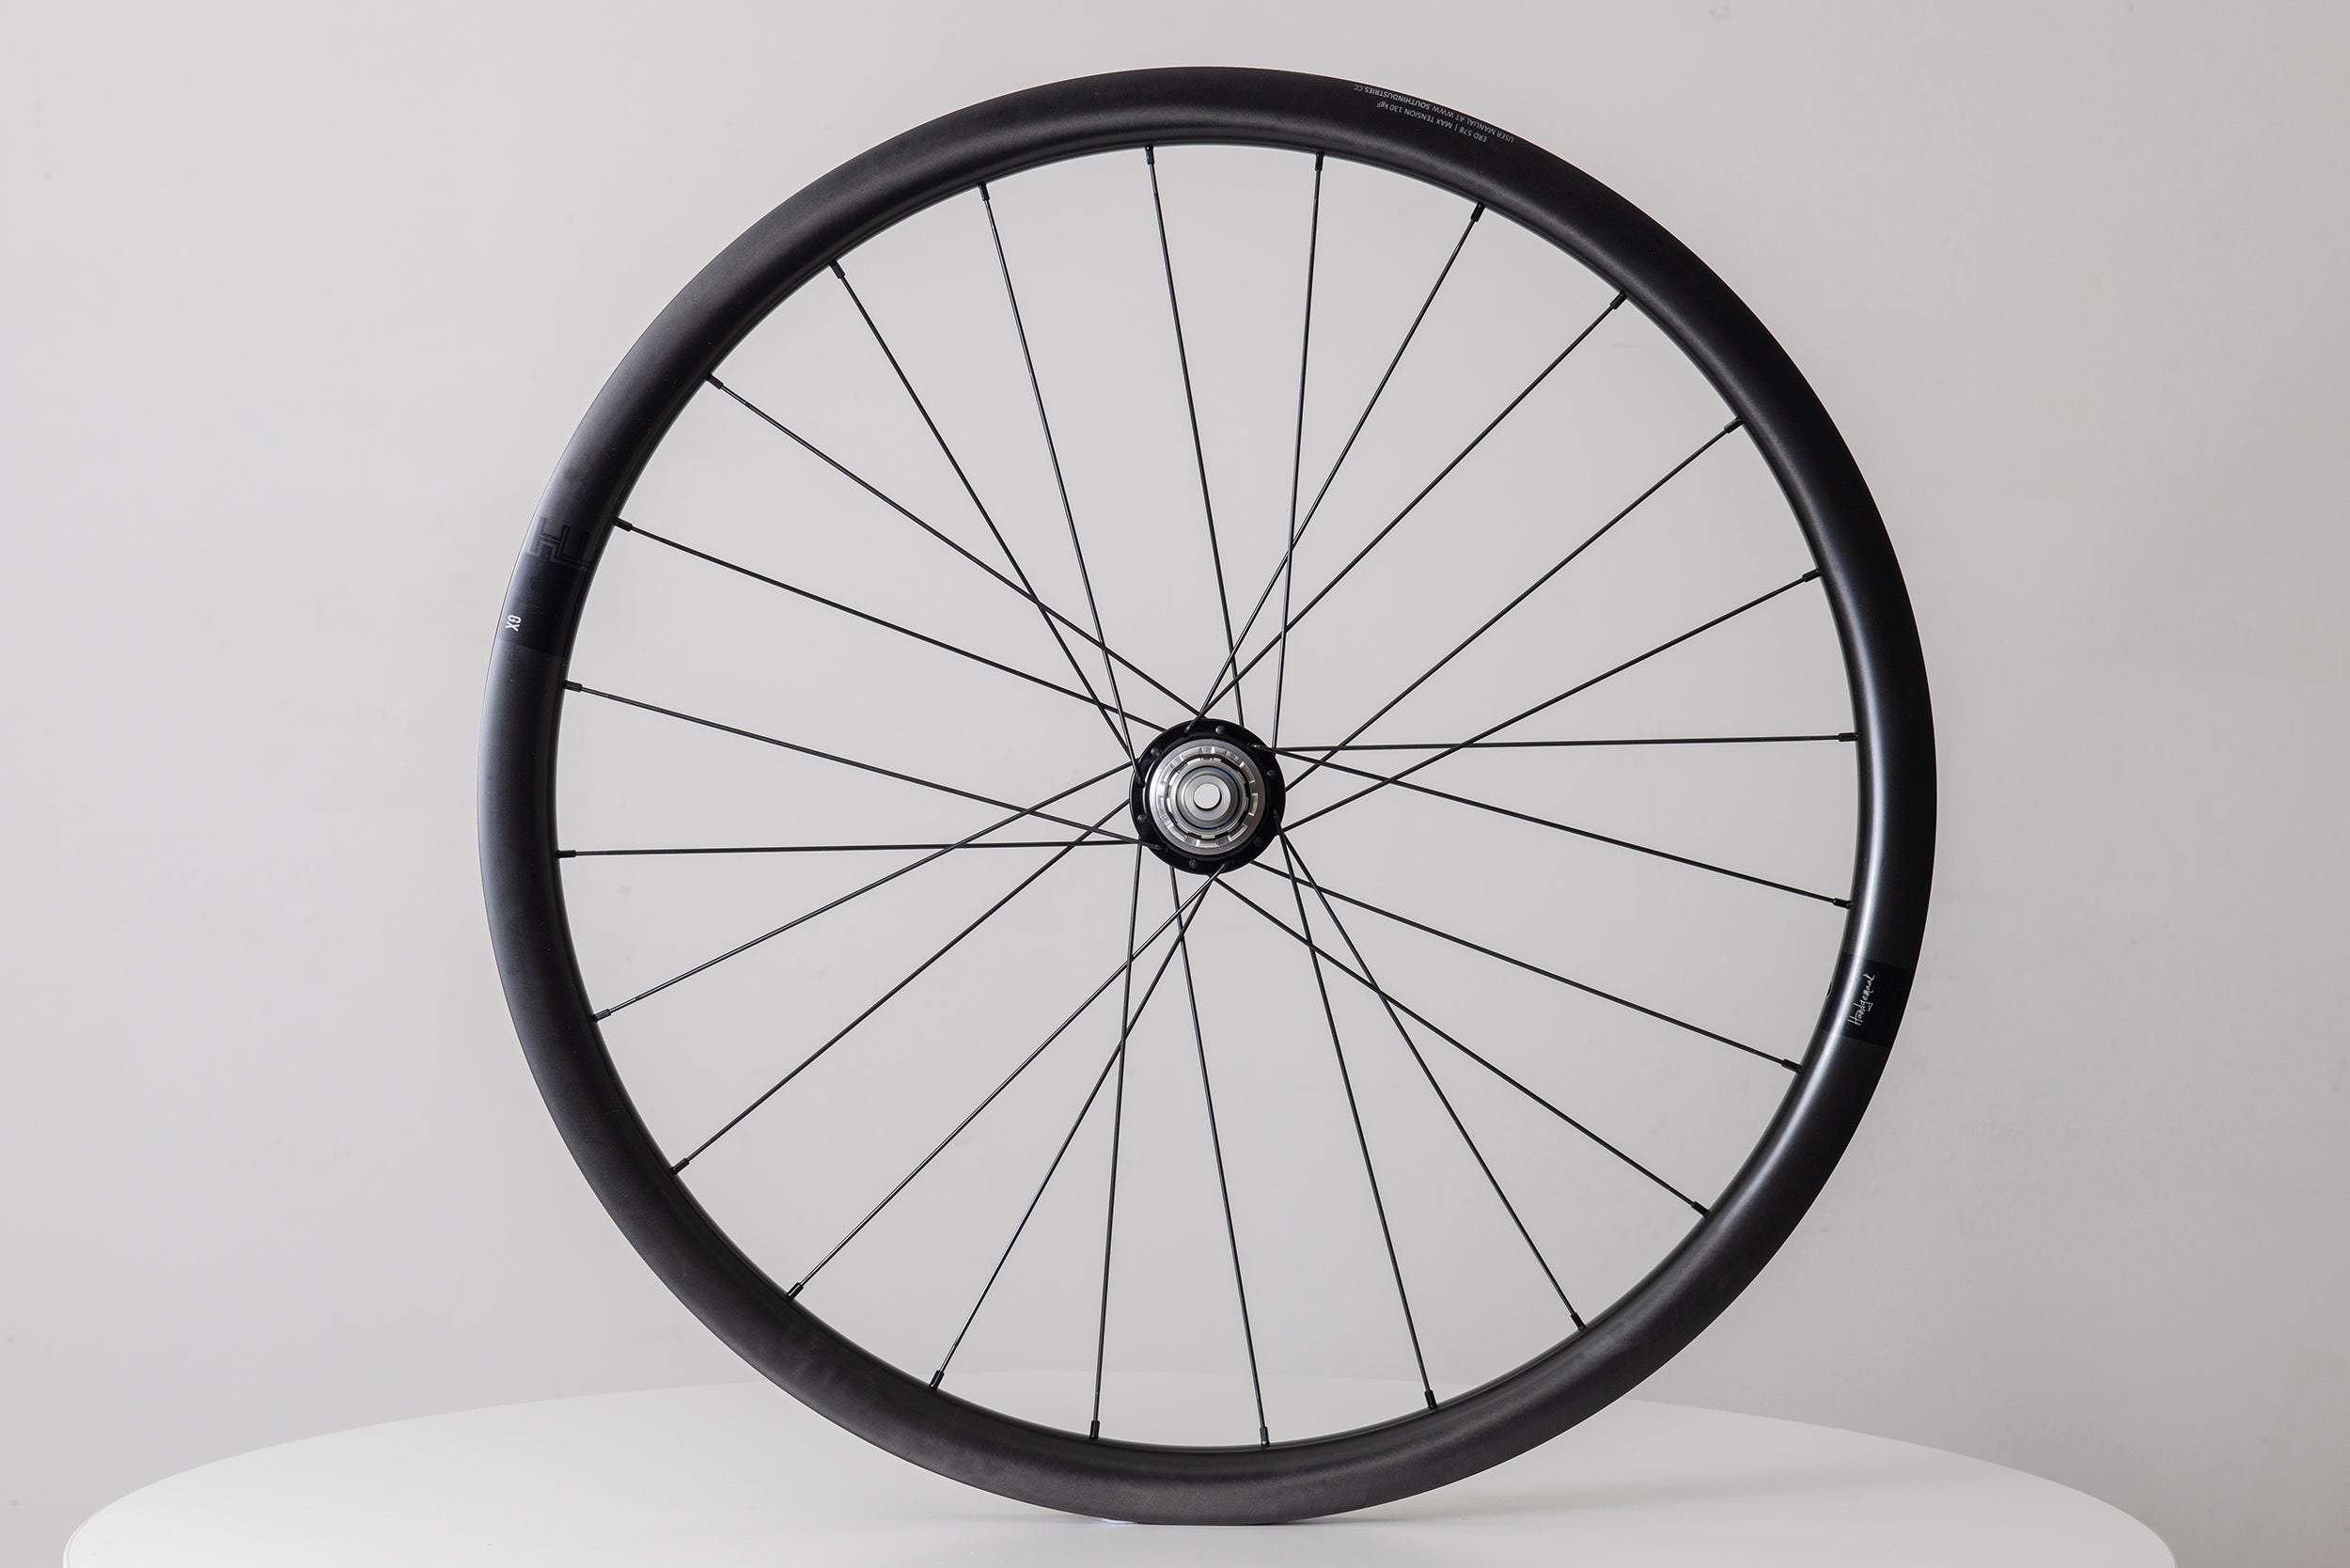 South Industries GX Gravel Wheelsets